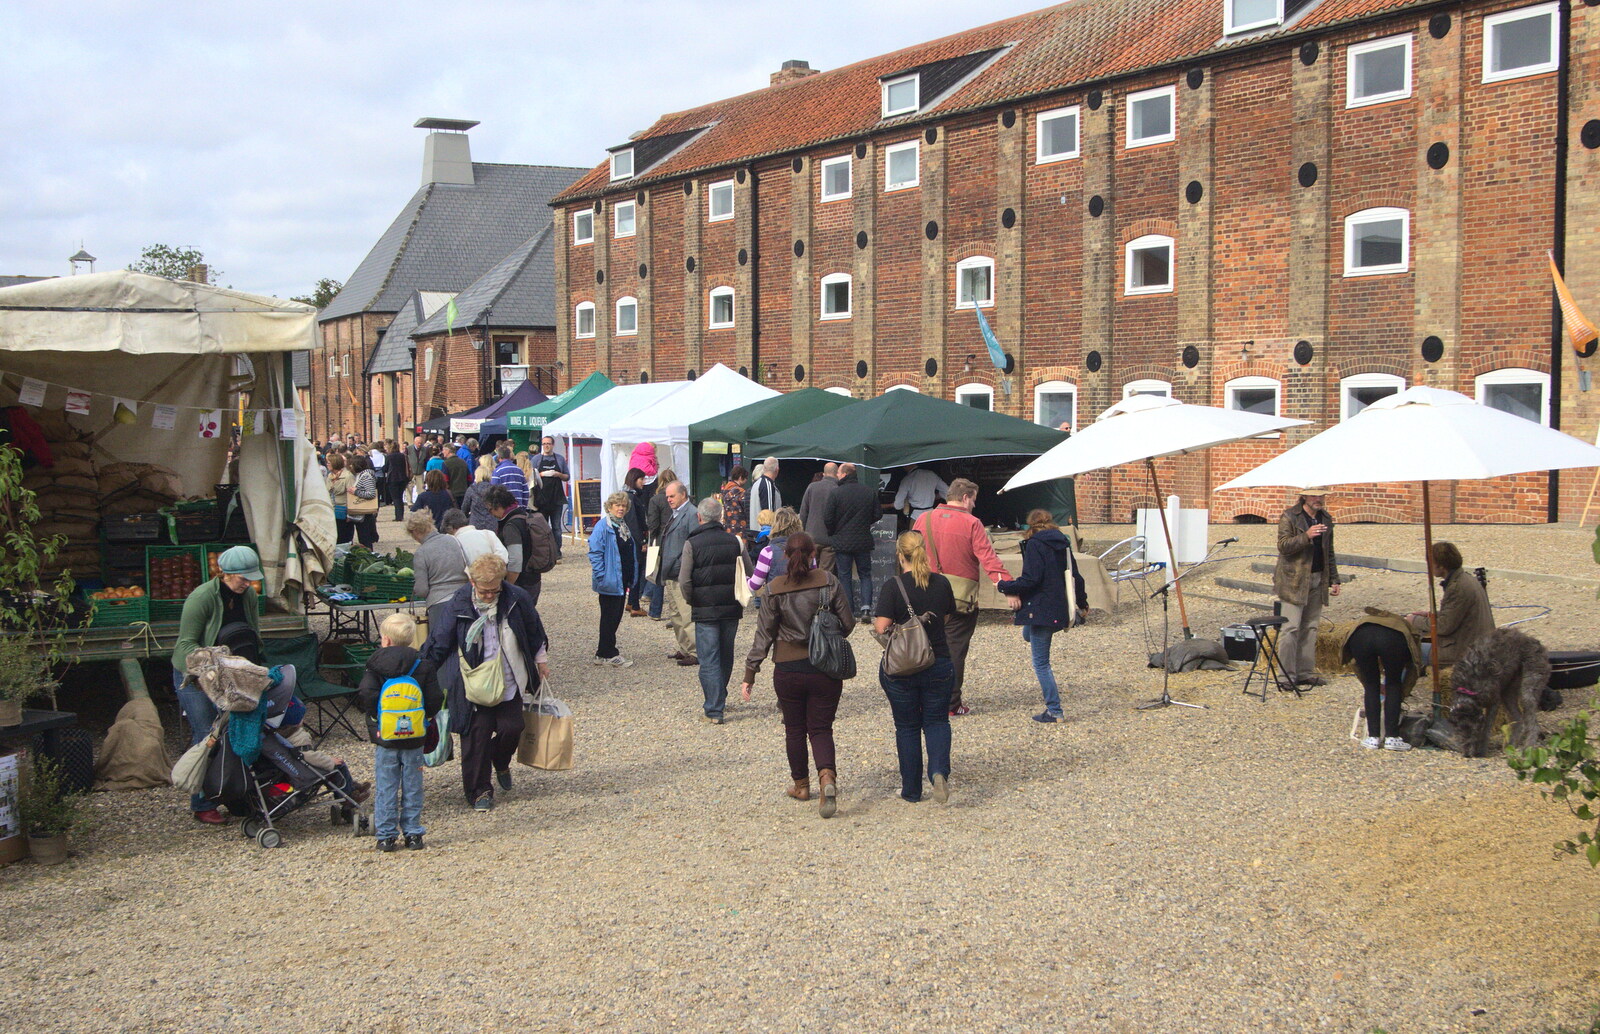 Snape Maltings and the Food Festival from The Aldeburgh Food Festival, Aldeburgh, Suffolk - 30th September 2012